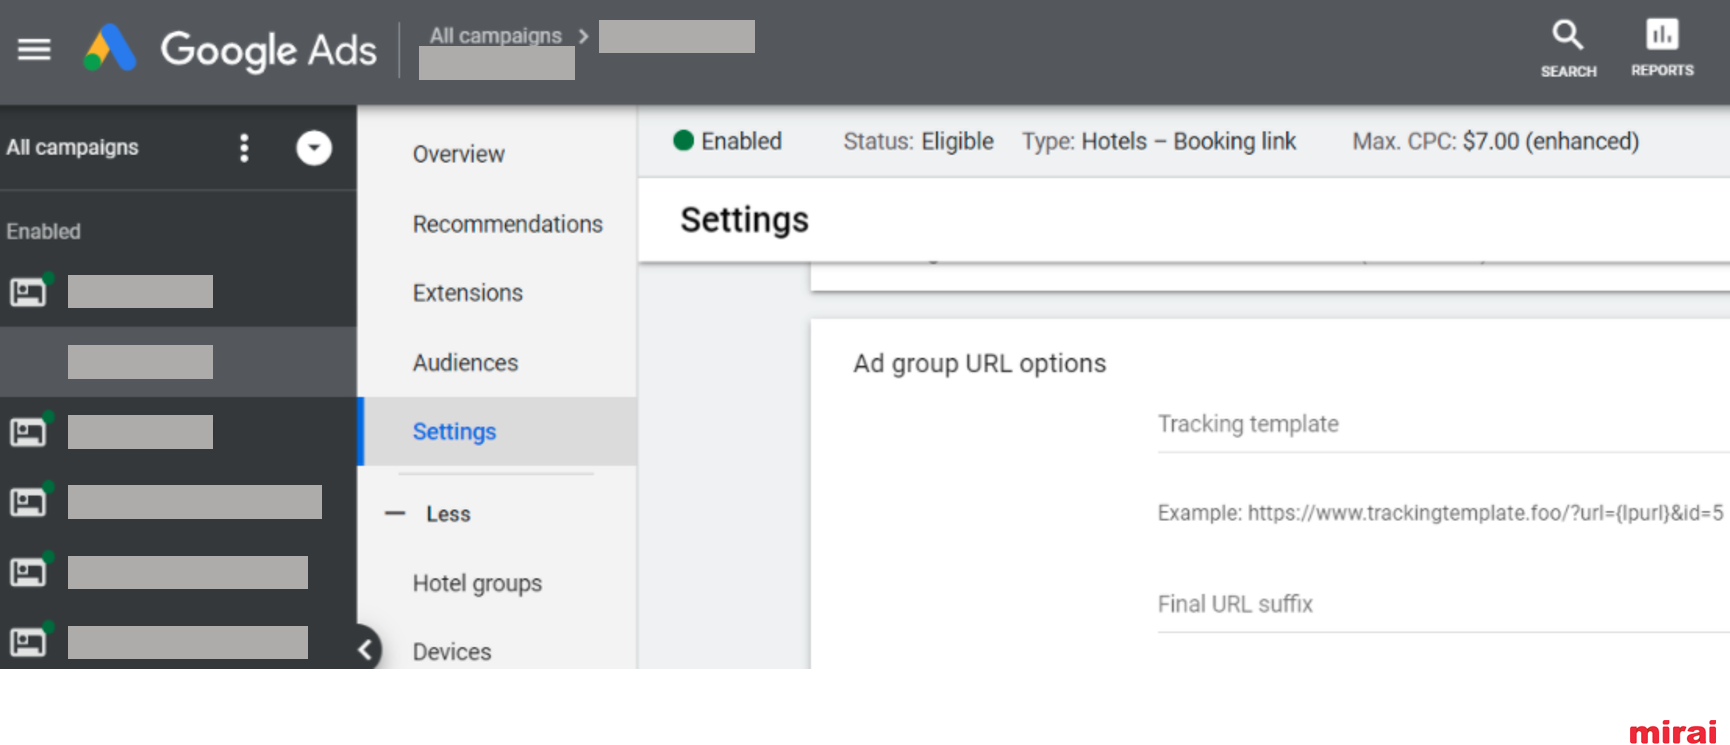 Monitor your performance in Google Hotel Ads - Mirai